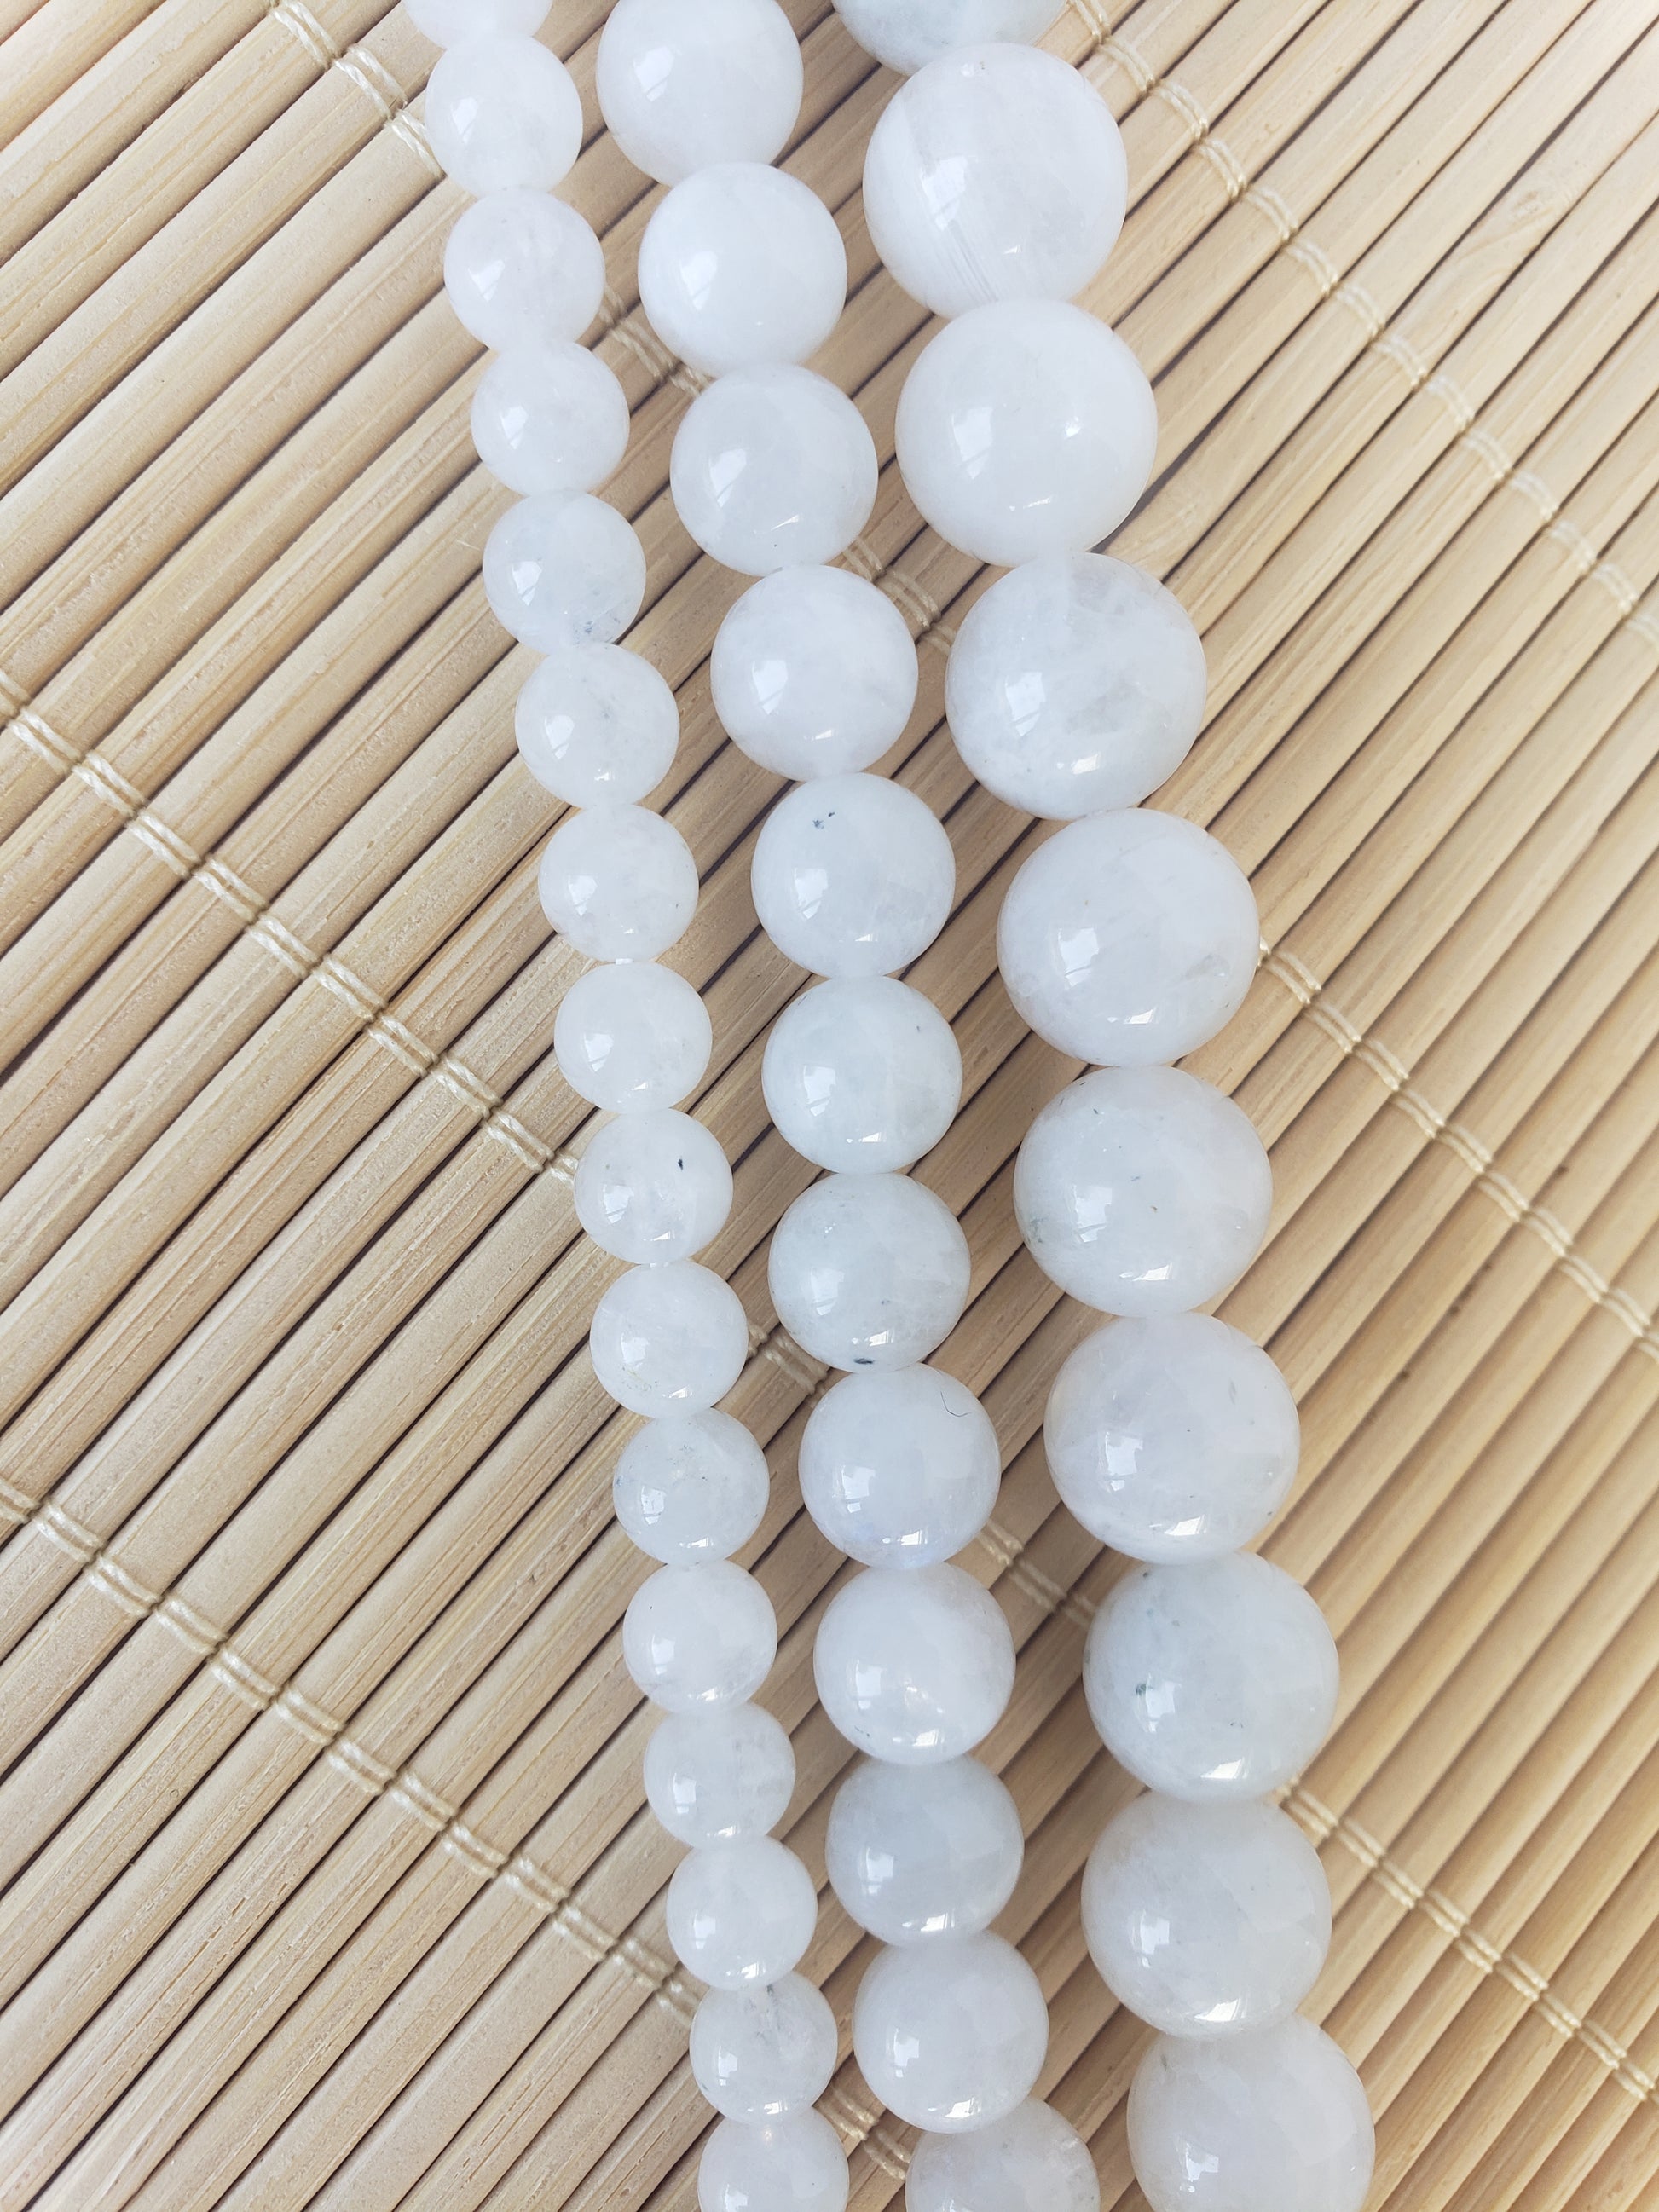 Crafting supplies such as rainbow moonstone beads available at wholesale and retail prices, only at our crystal shop in San Diego!